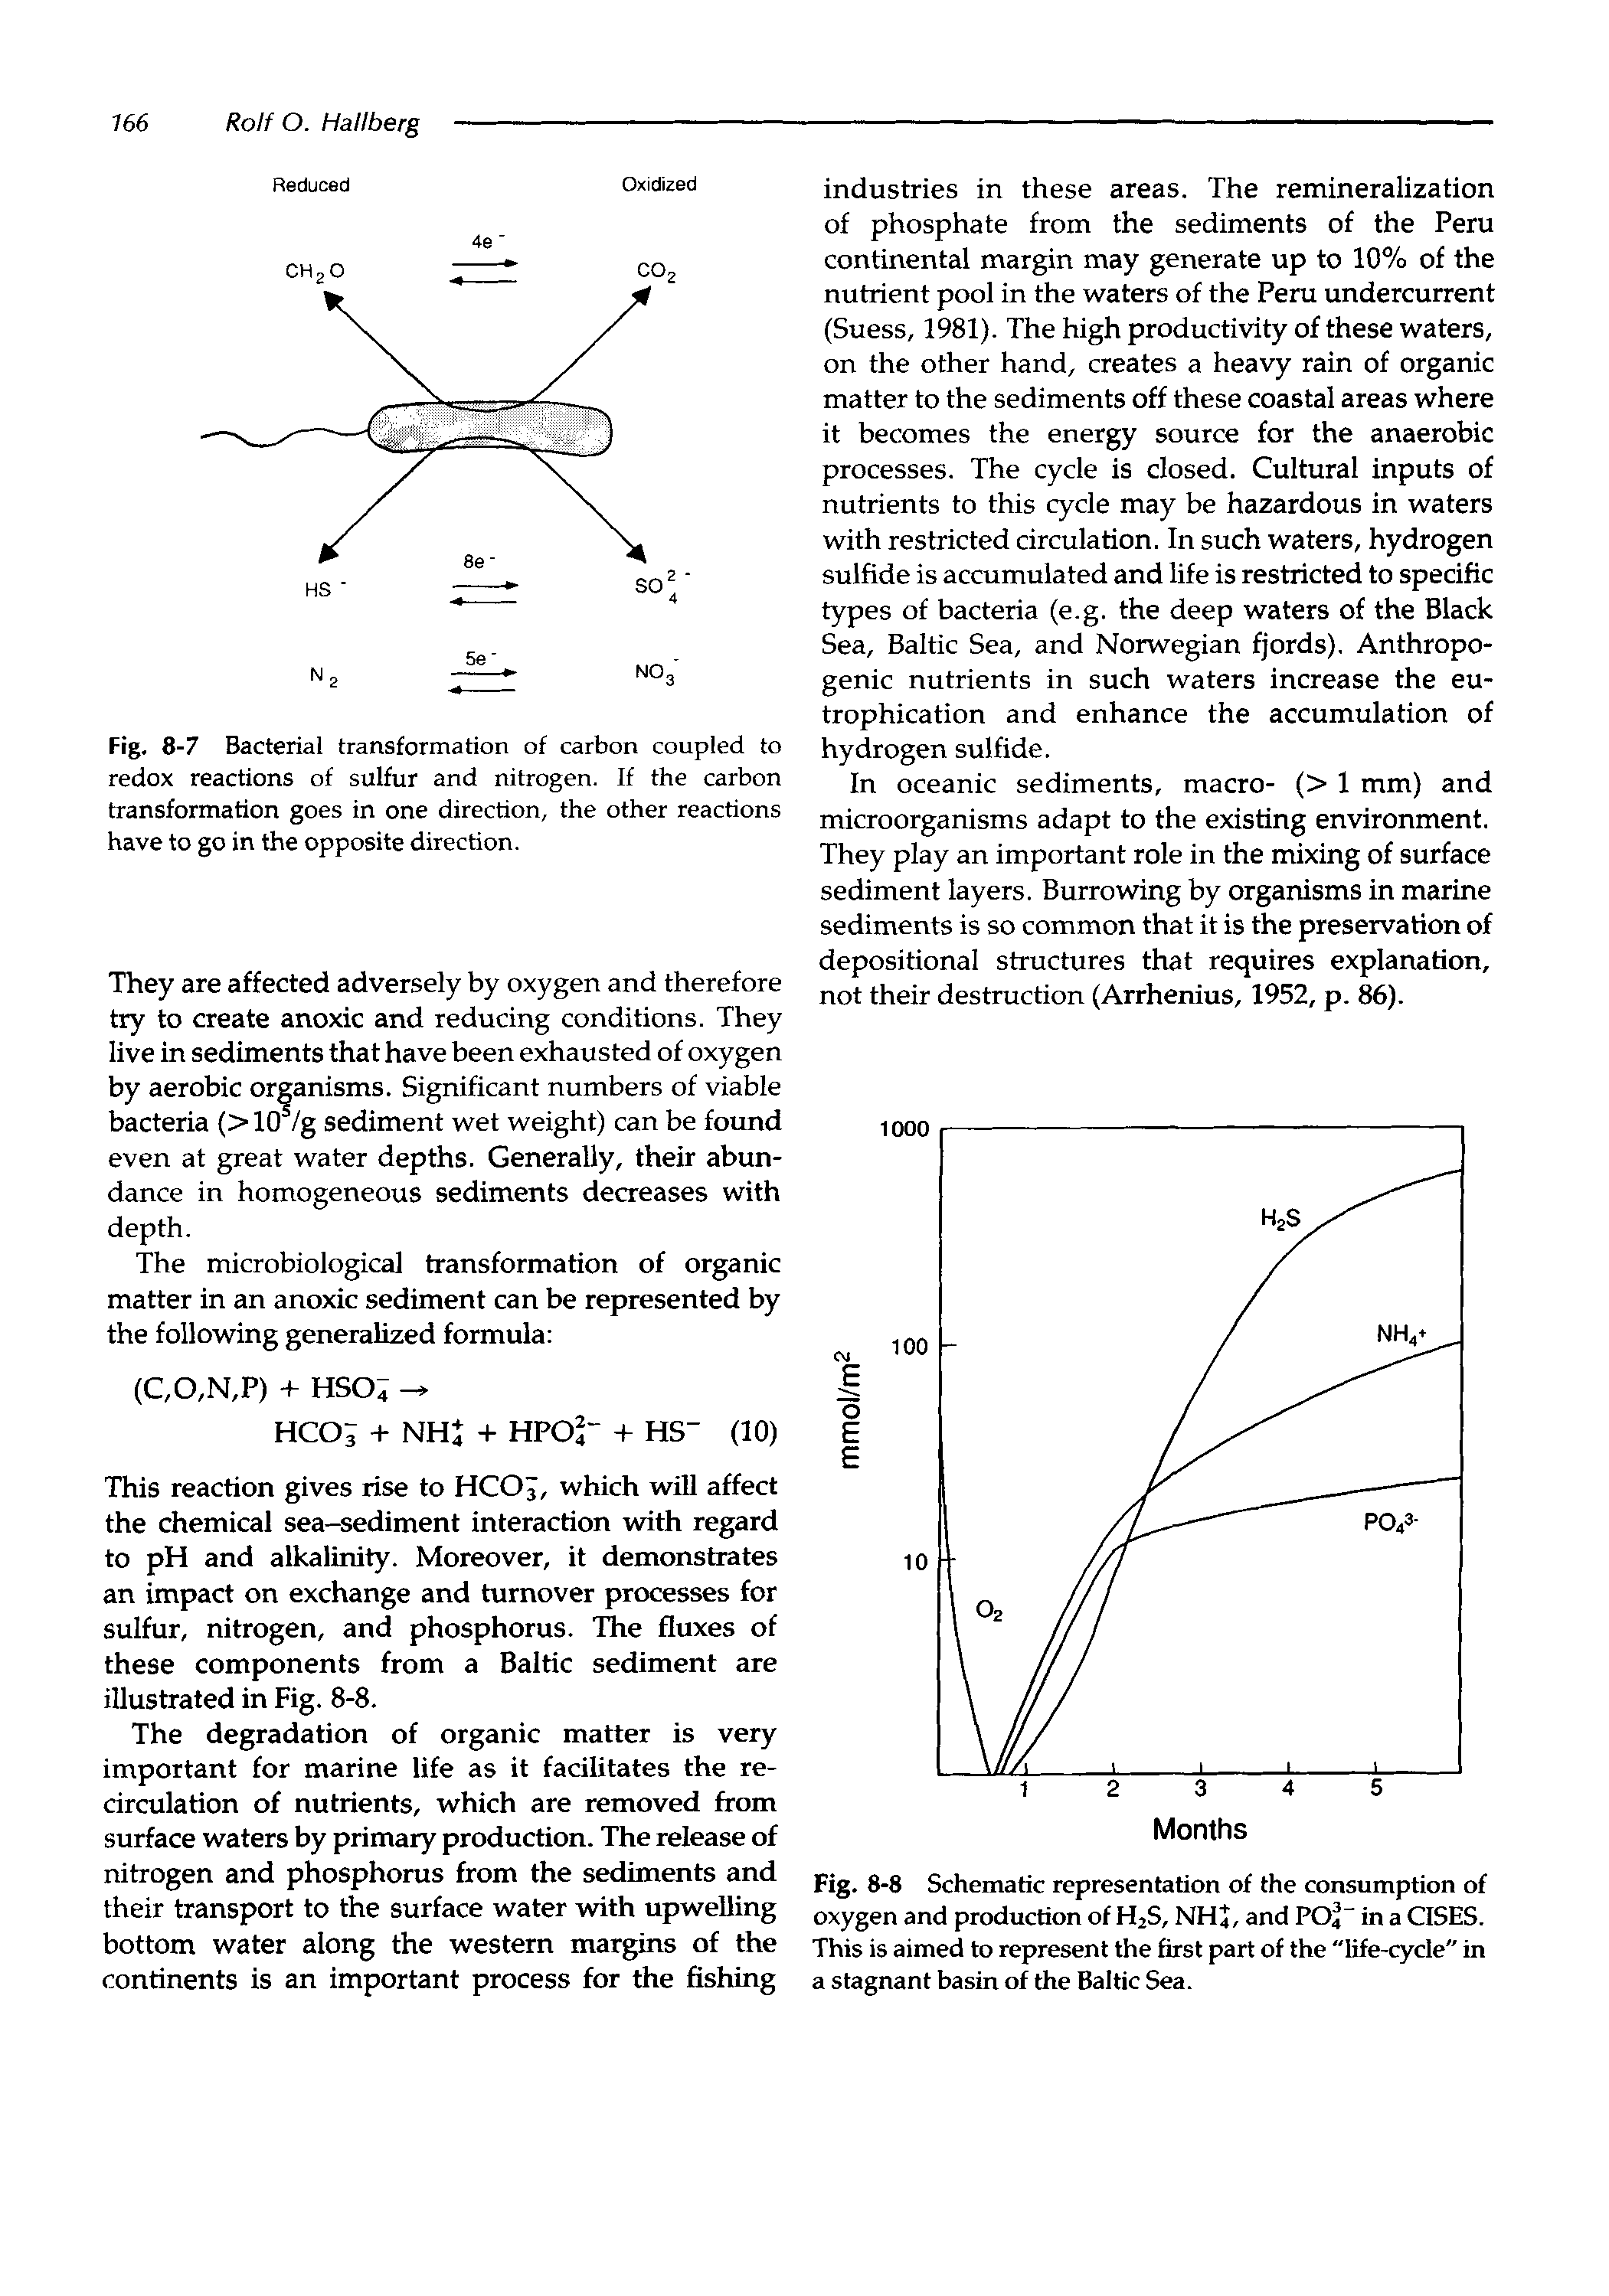 Fig. 8-7 Bacterial transformation of carbon coupled to redox reactions of sulfur and nitrogen. If the carbon transformation goes in one direction, the other reactions have to go in the opposite direction.